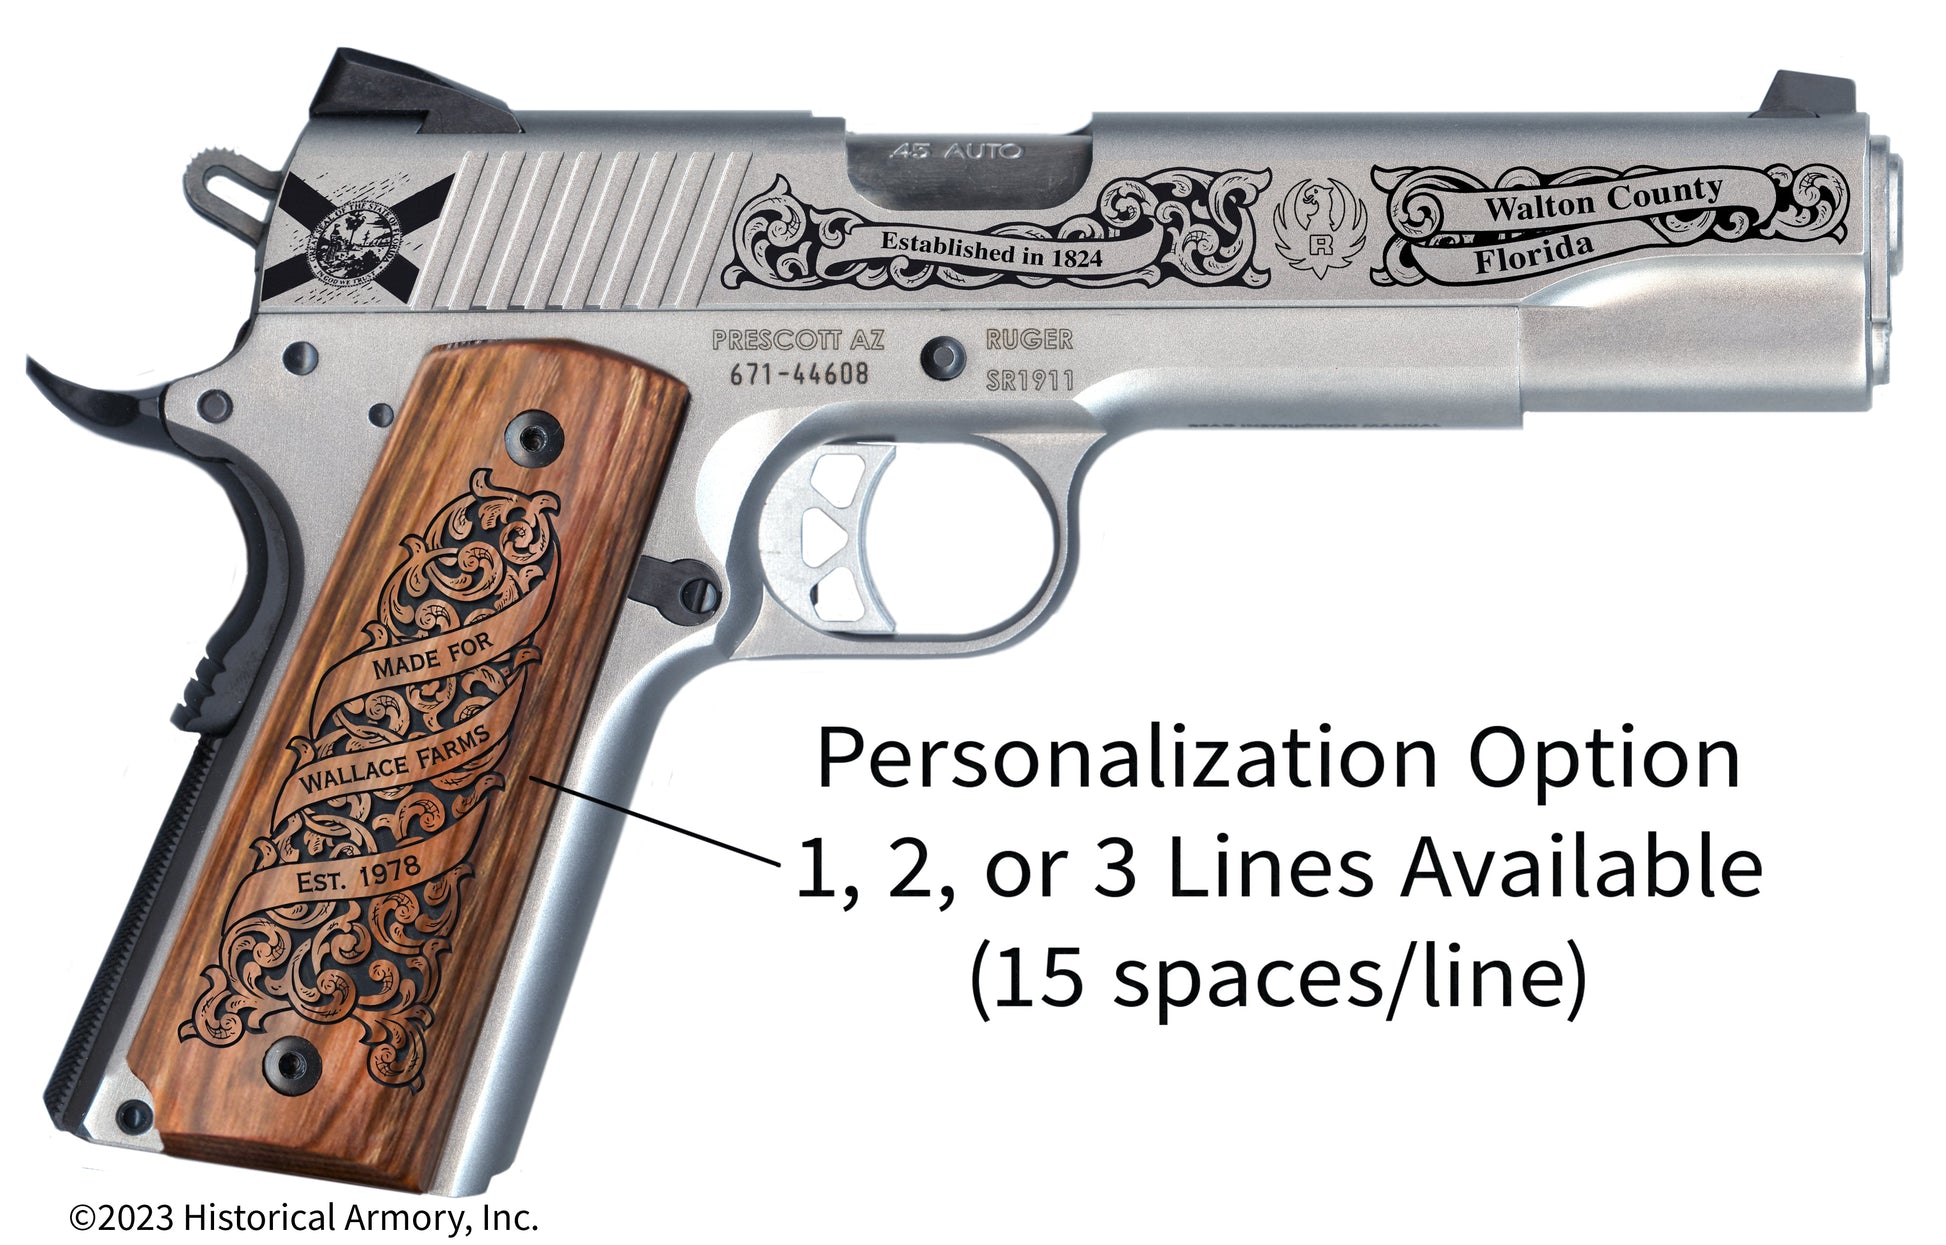 Walton County Florida Personalized Engraved .45 Auto Ruger 1911